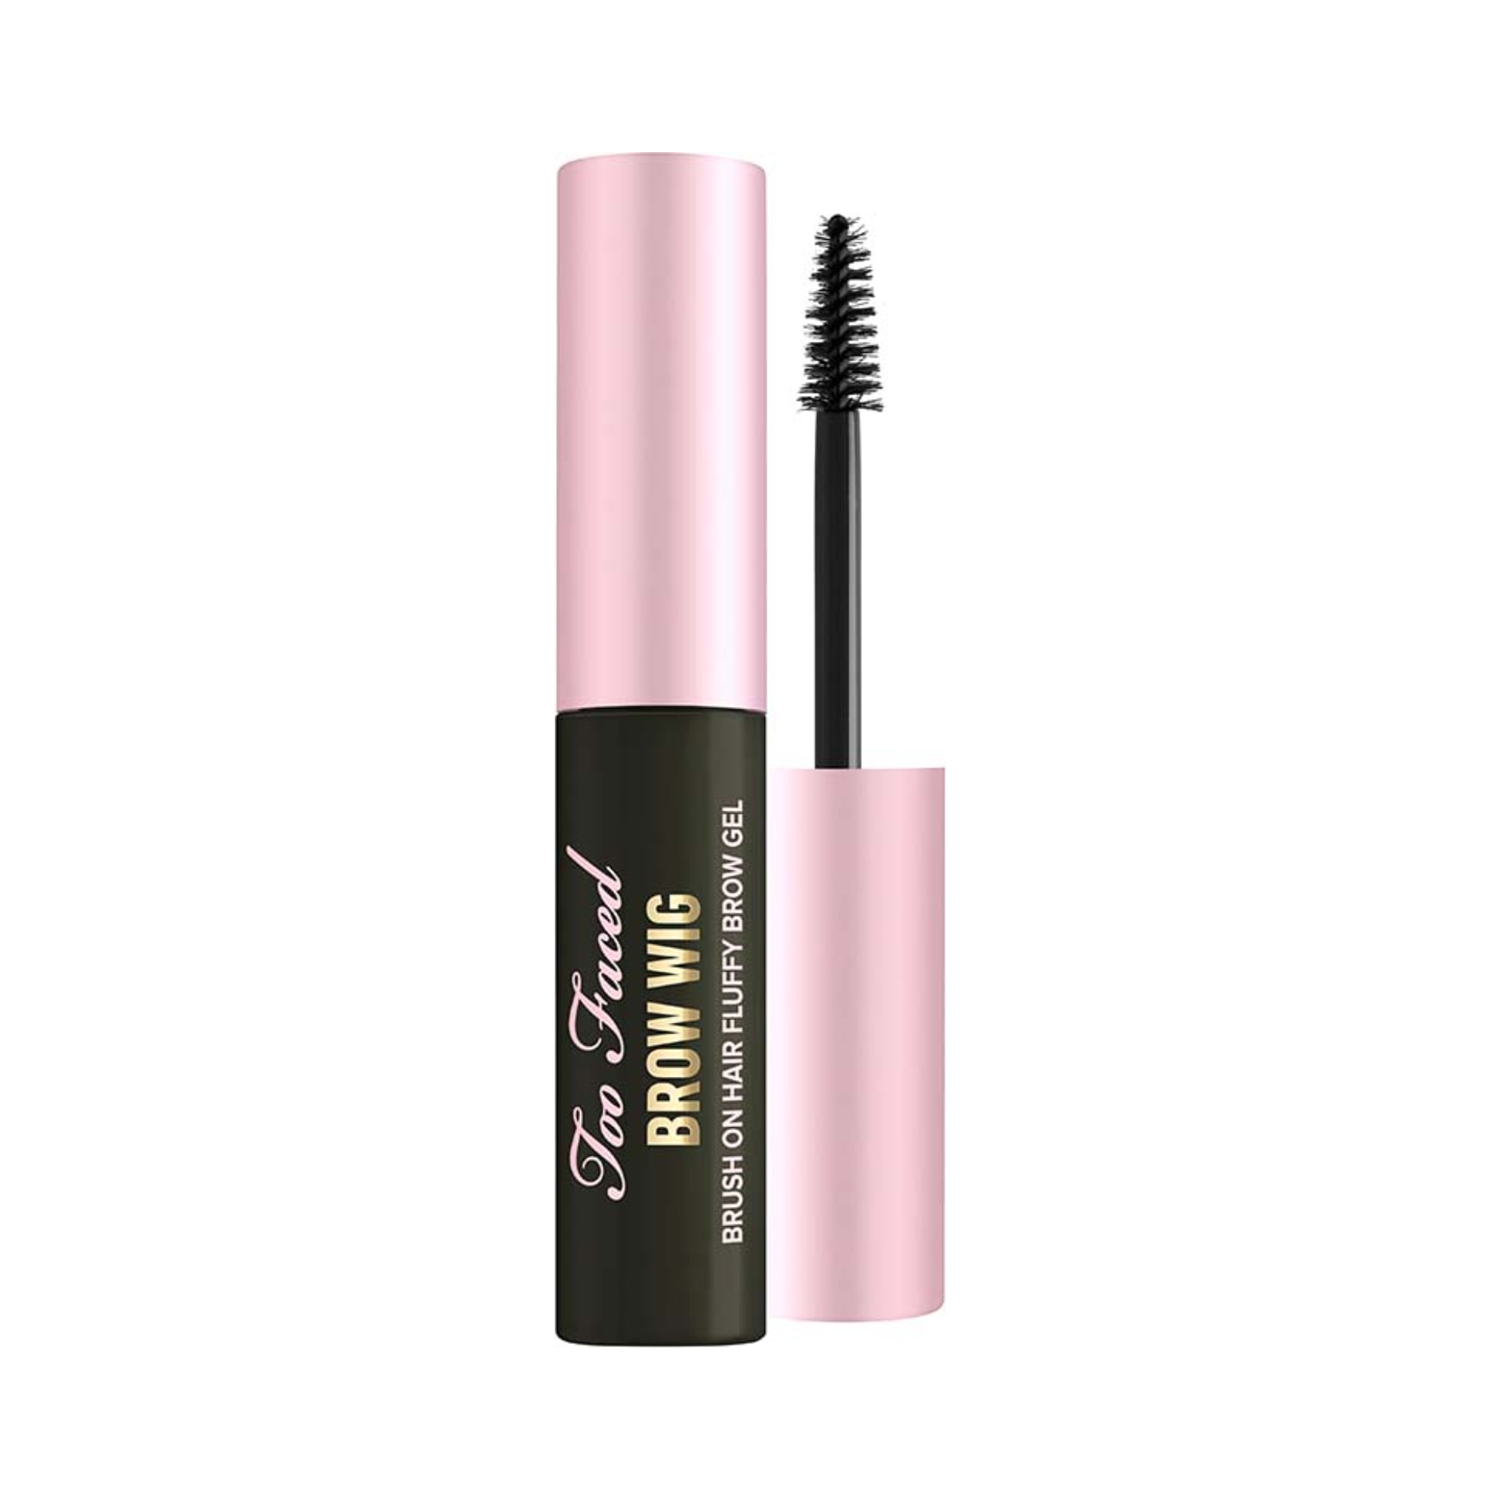 Too Faced | Too Faced Brow Wig Eyebrow Gel - Soft Brown (5.5ml)